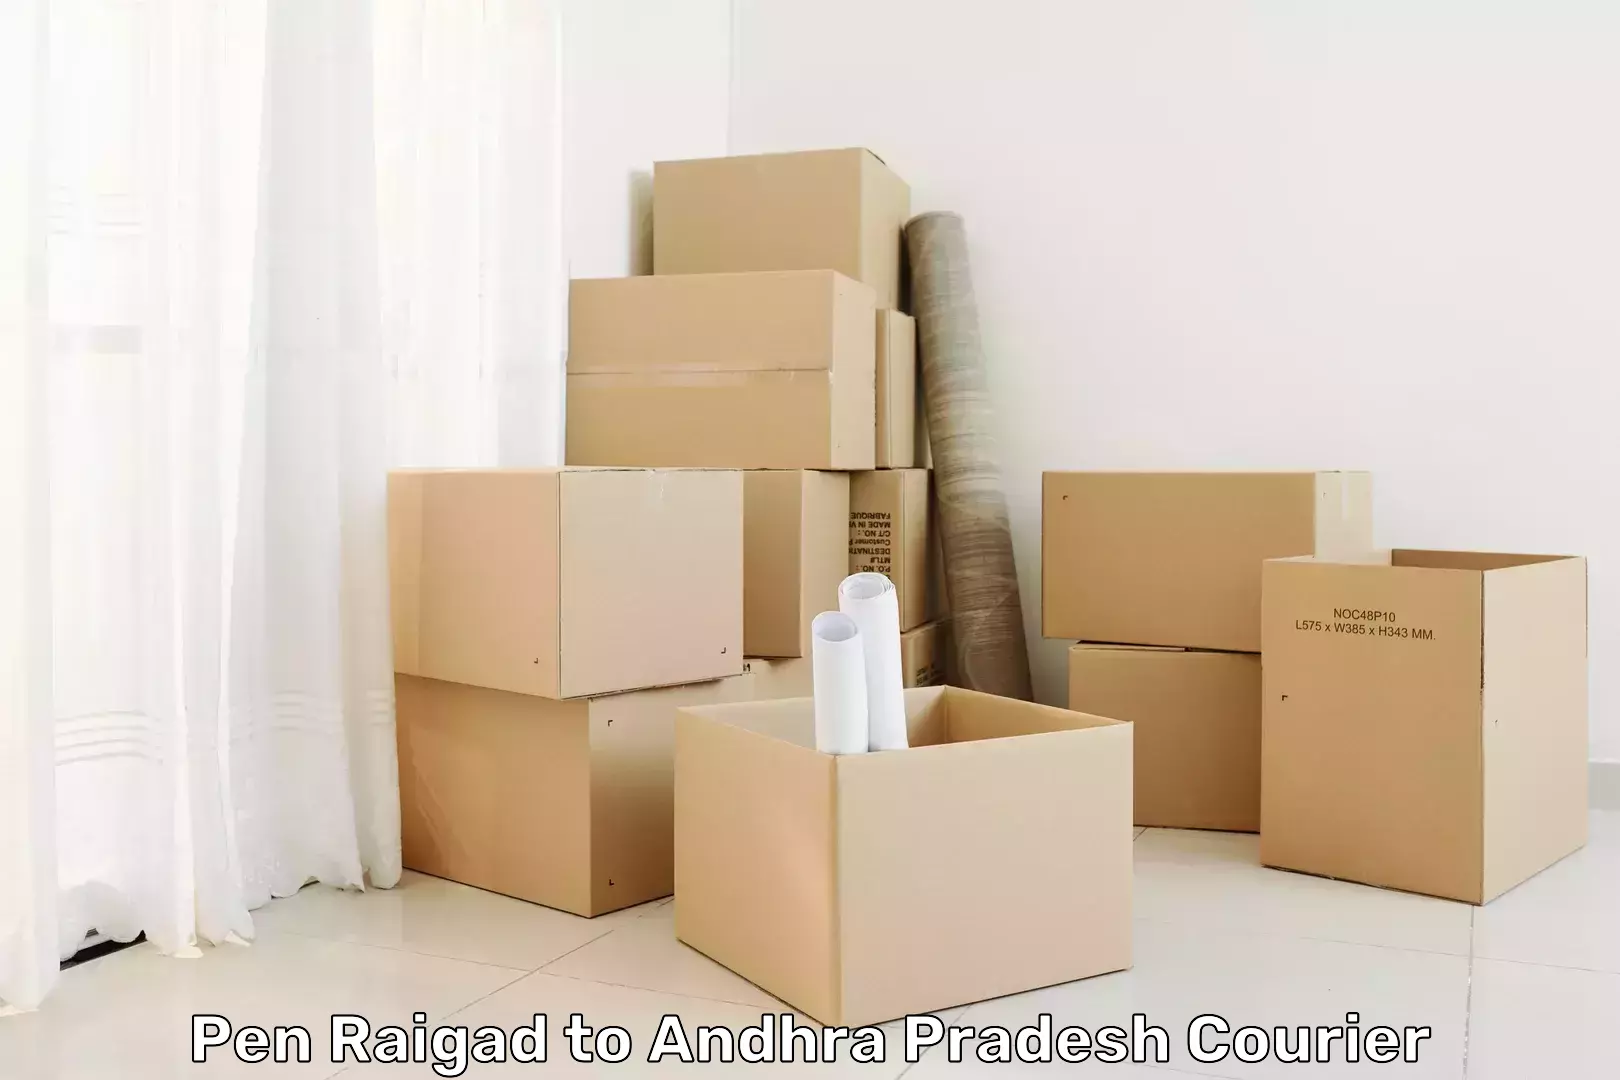 Full-service courier options Pen Raigad to Andhra Pradesh